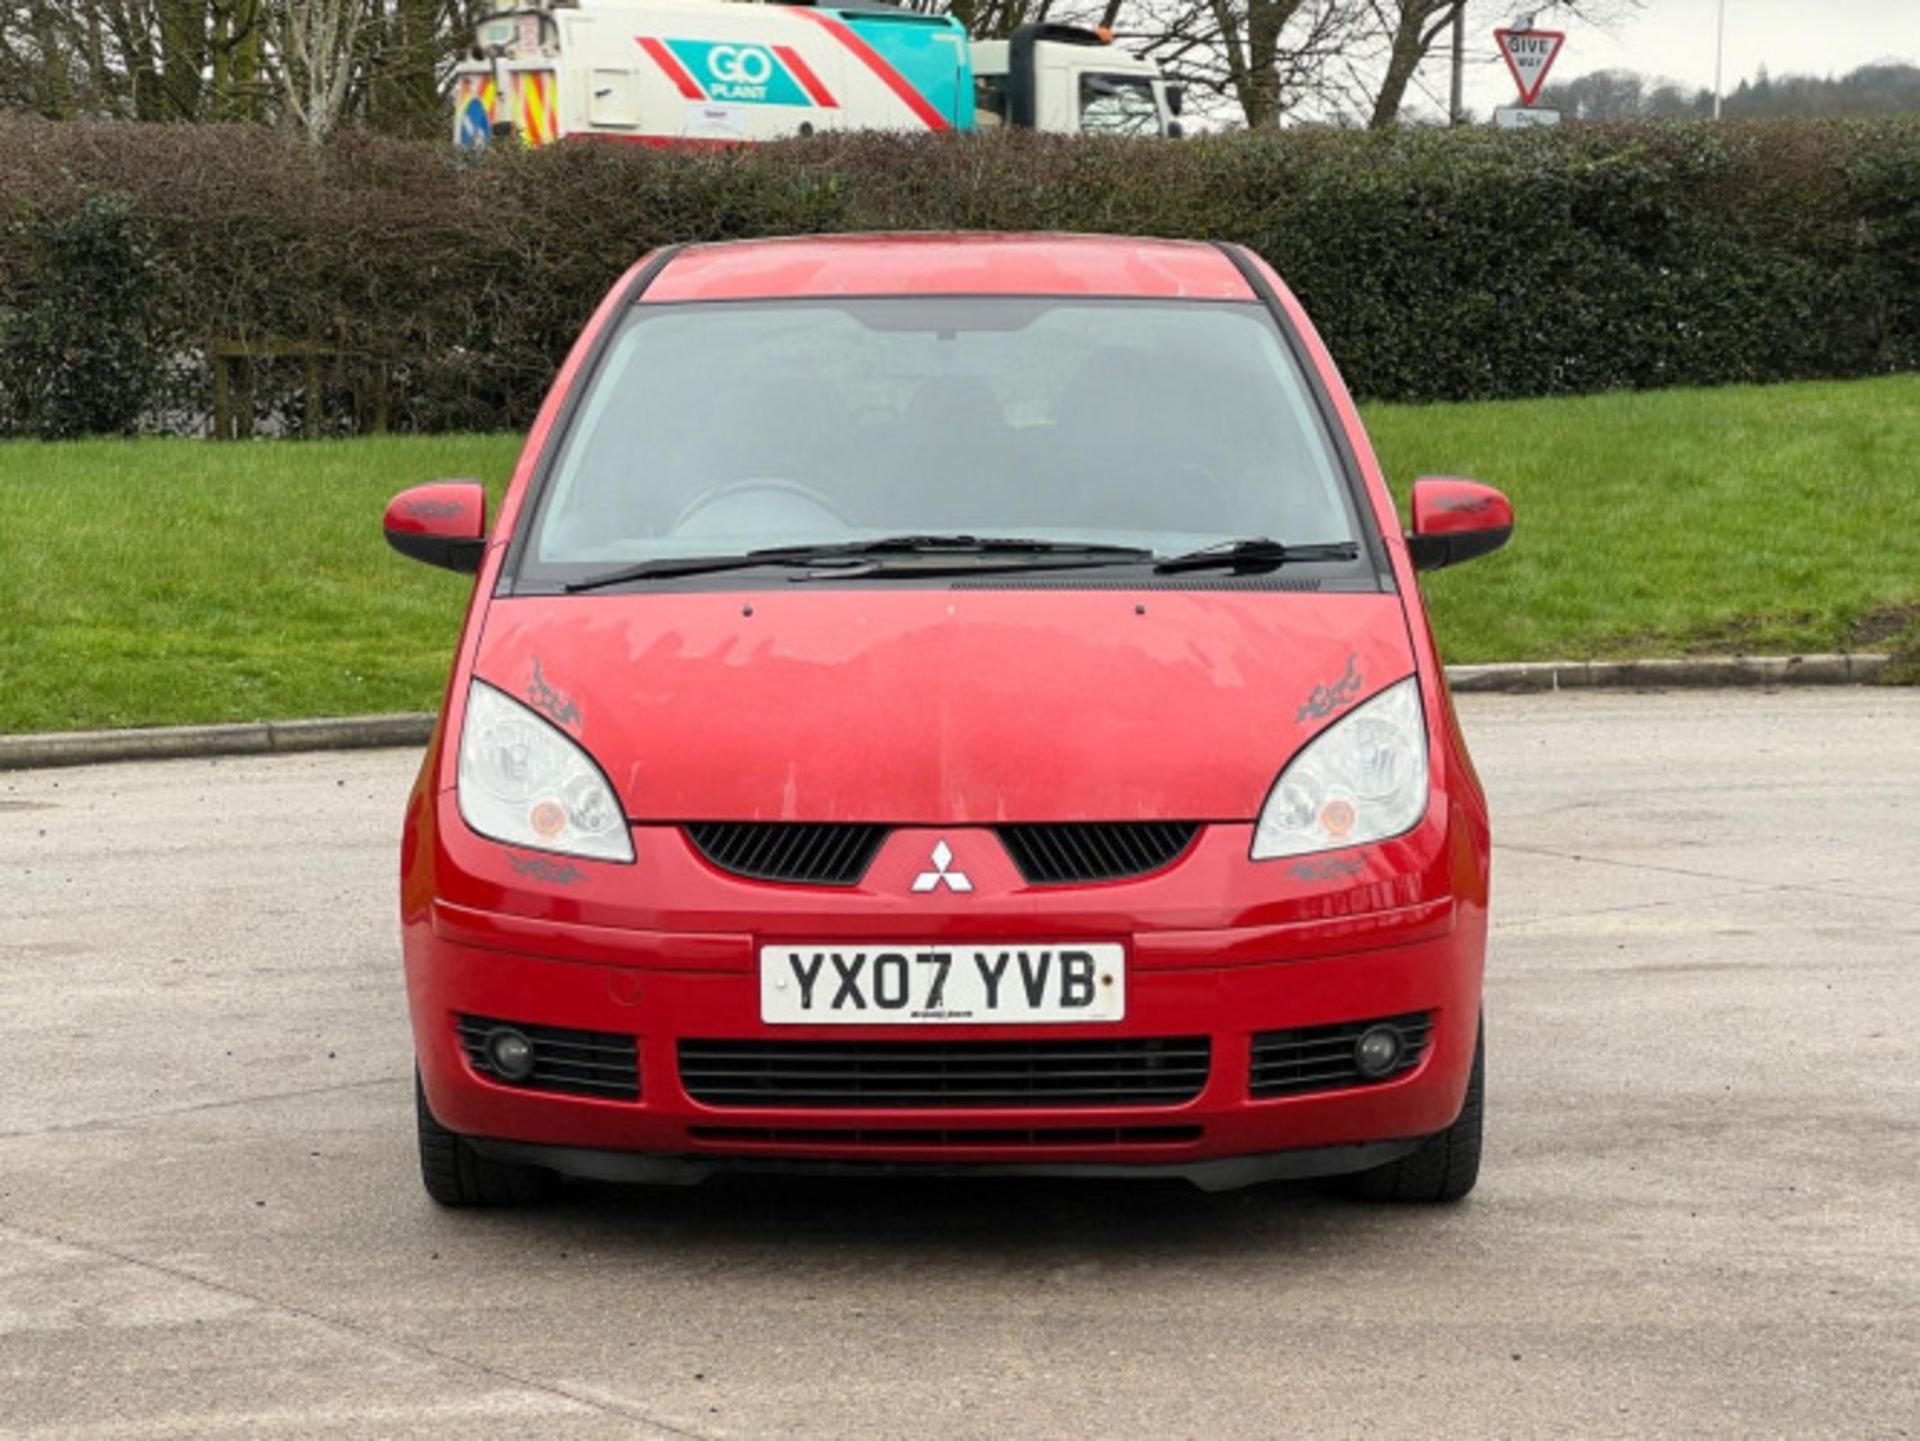 2007 MITSUBISHI COLT 1.5 DI-D DIESEL AUTOMATIC >>--NO VAT ON HAMMER--<< - Image 180 of 191